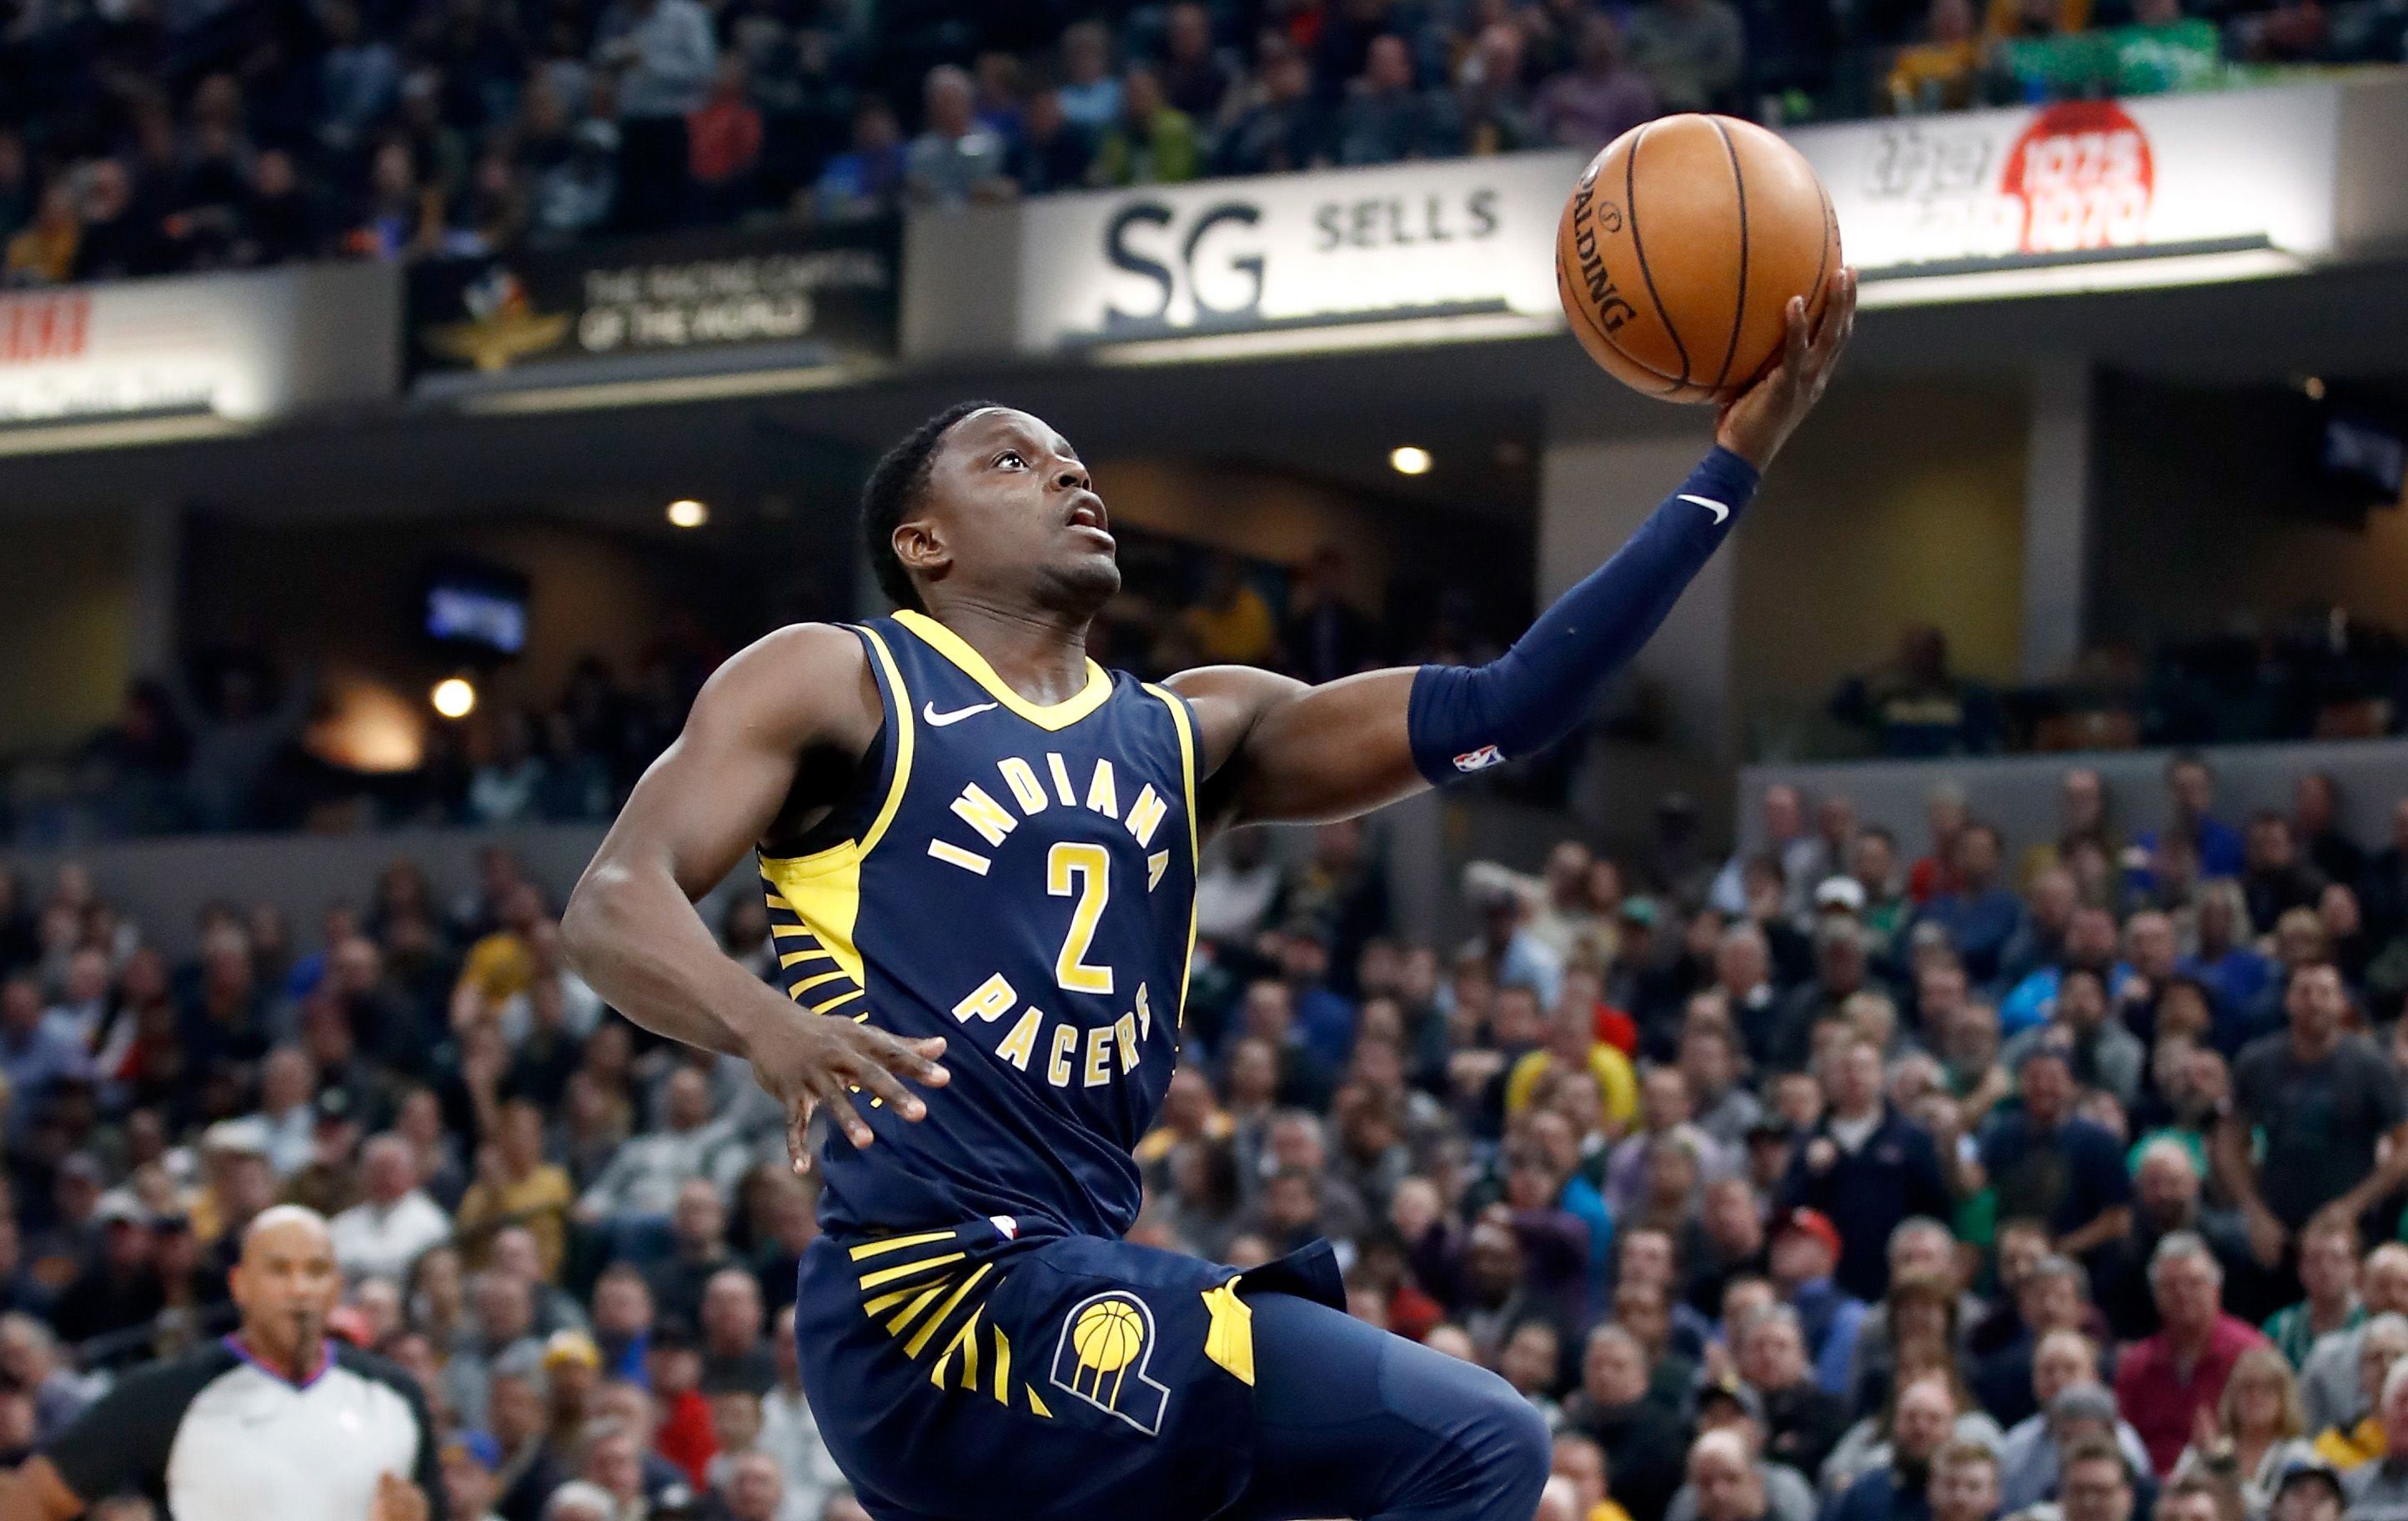 pacers jersey redesign - highlighting the indy 500 with racing